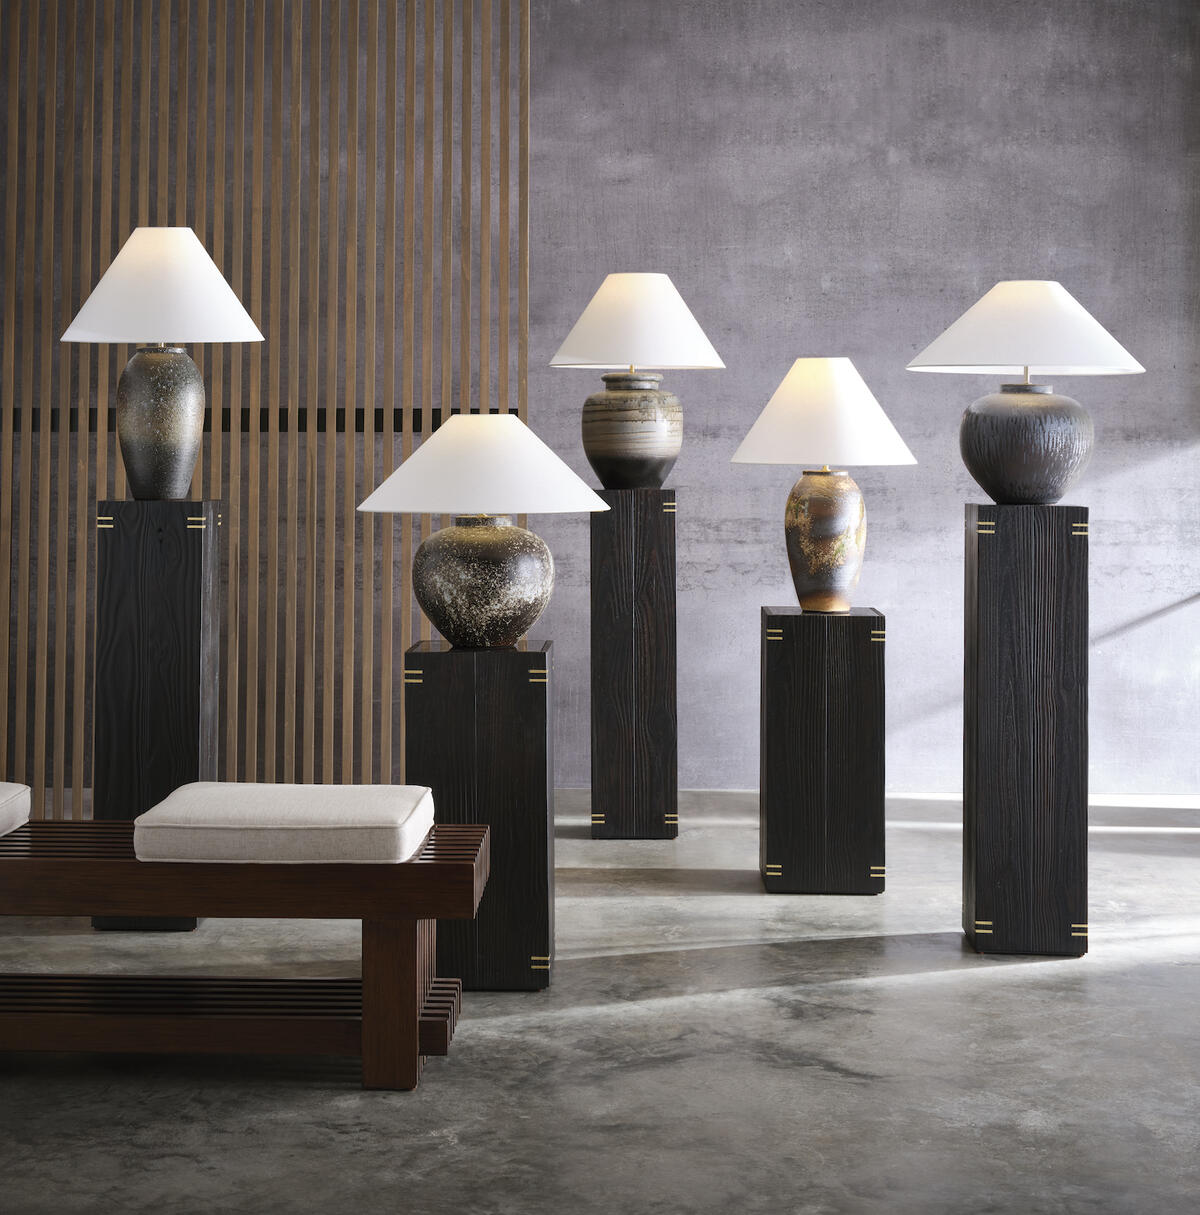 A selection of lamps from Wildwood’s Shiga collection